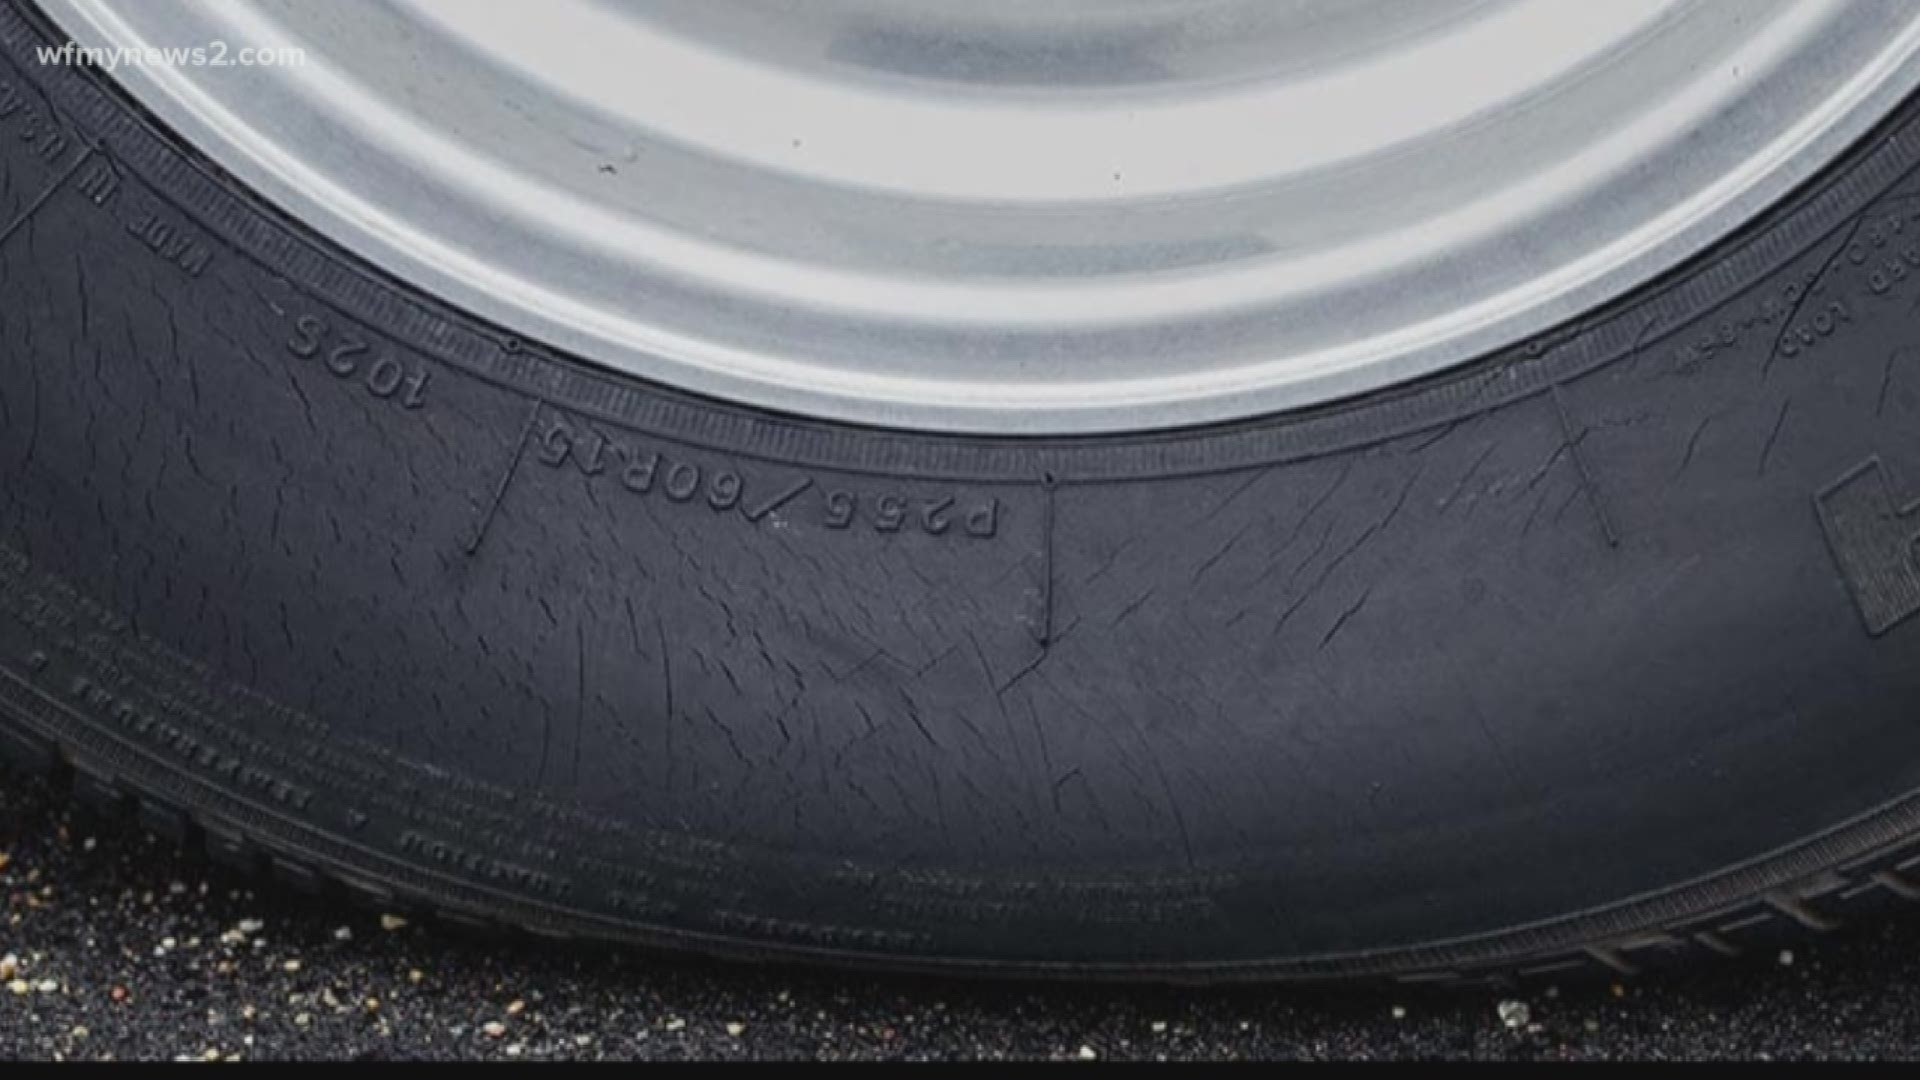 It only takes 26 cents to figure out if you need new tires